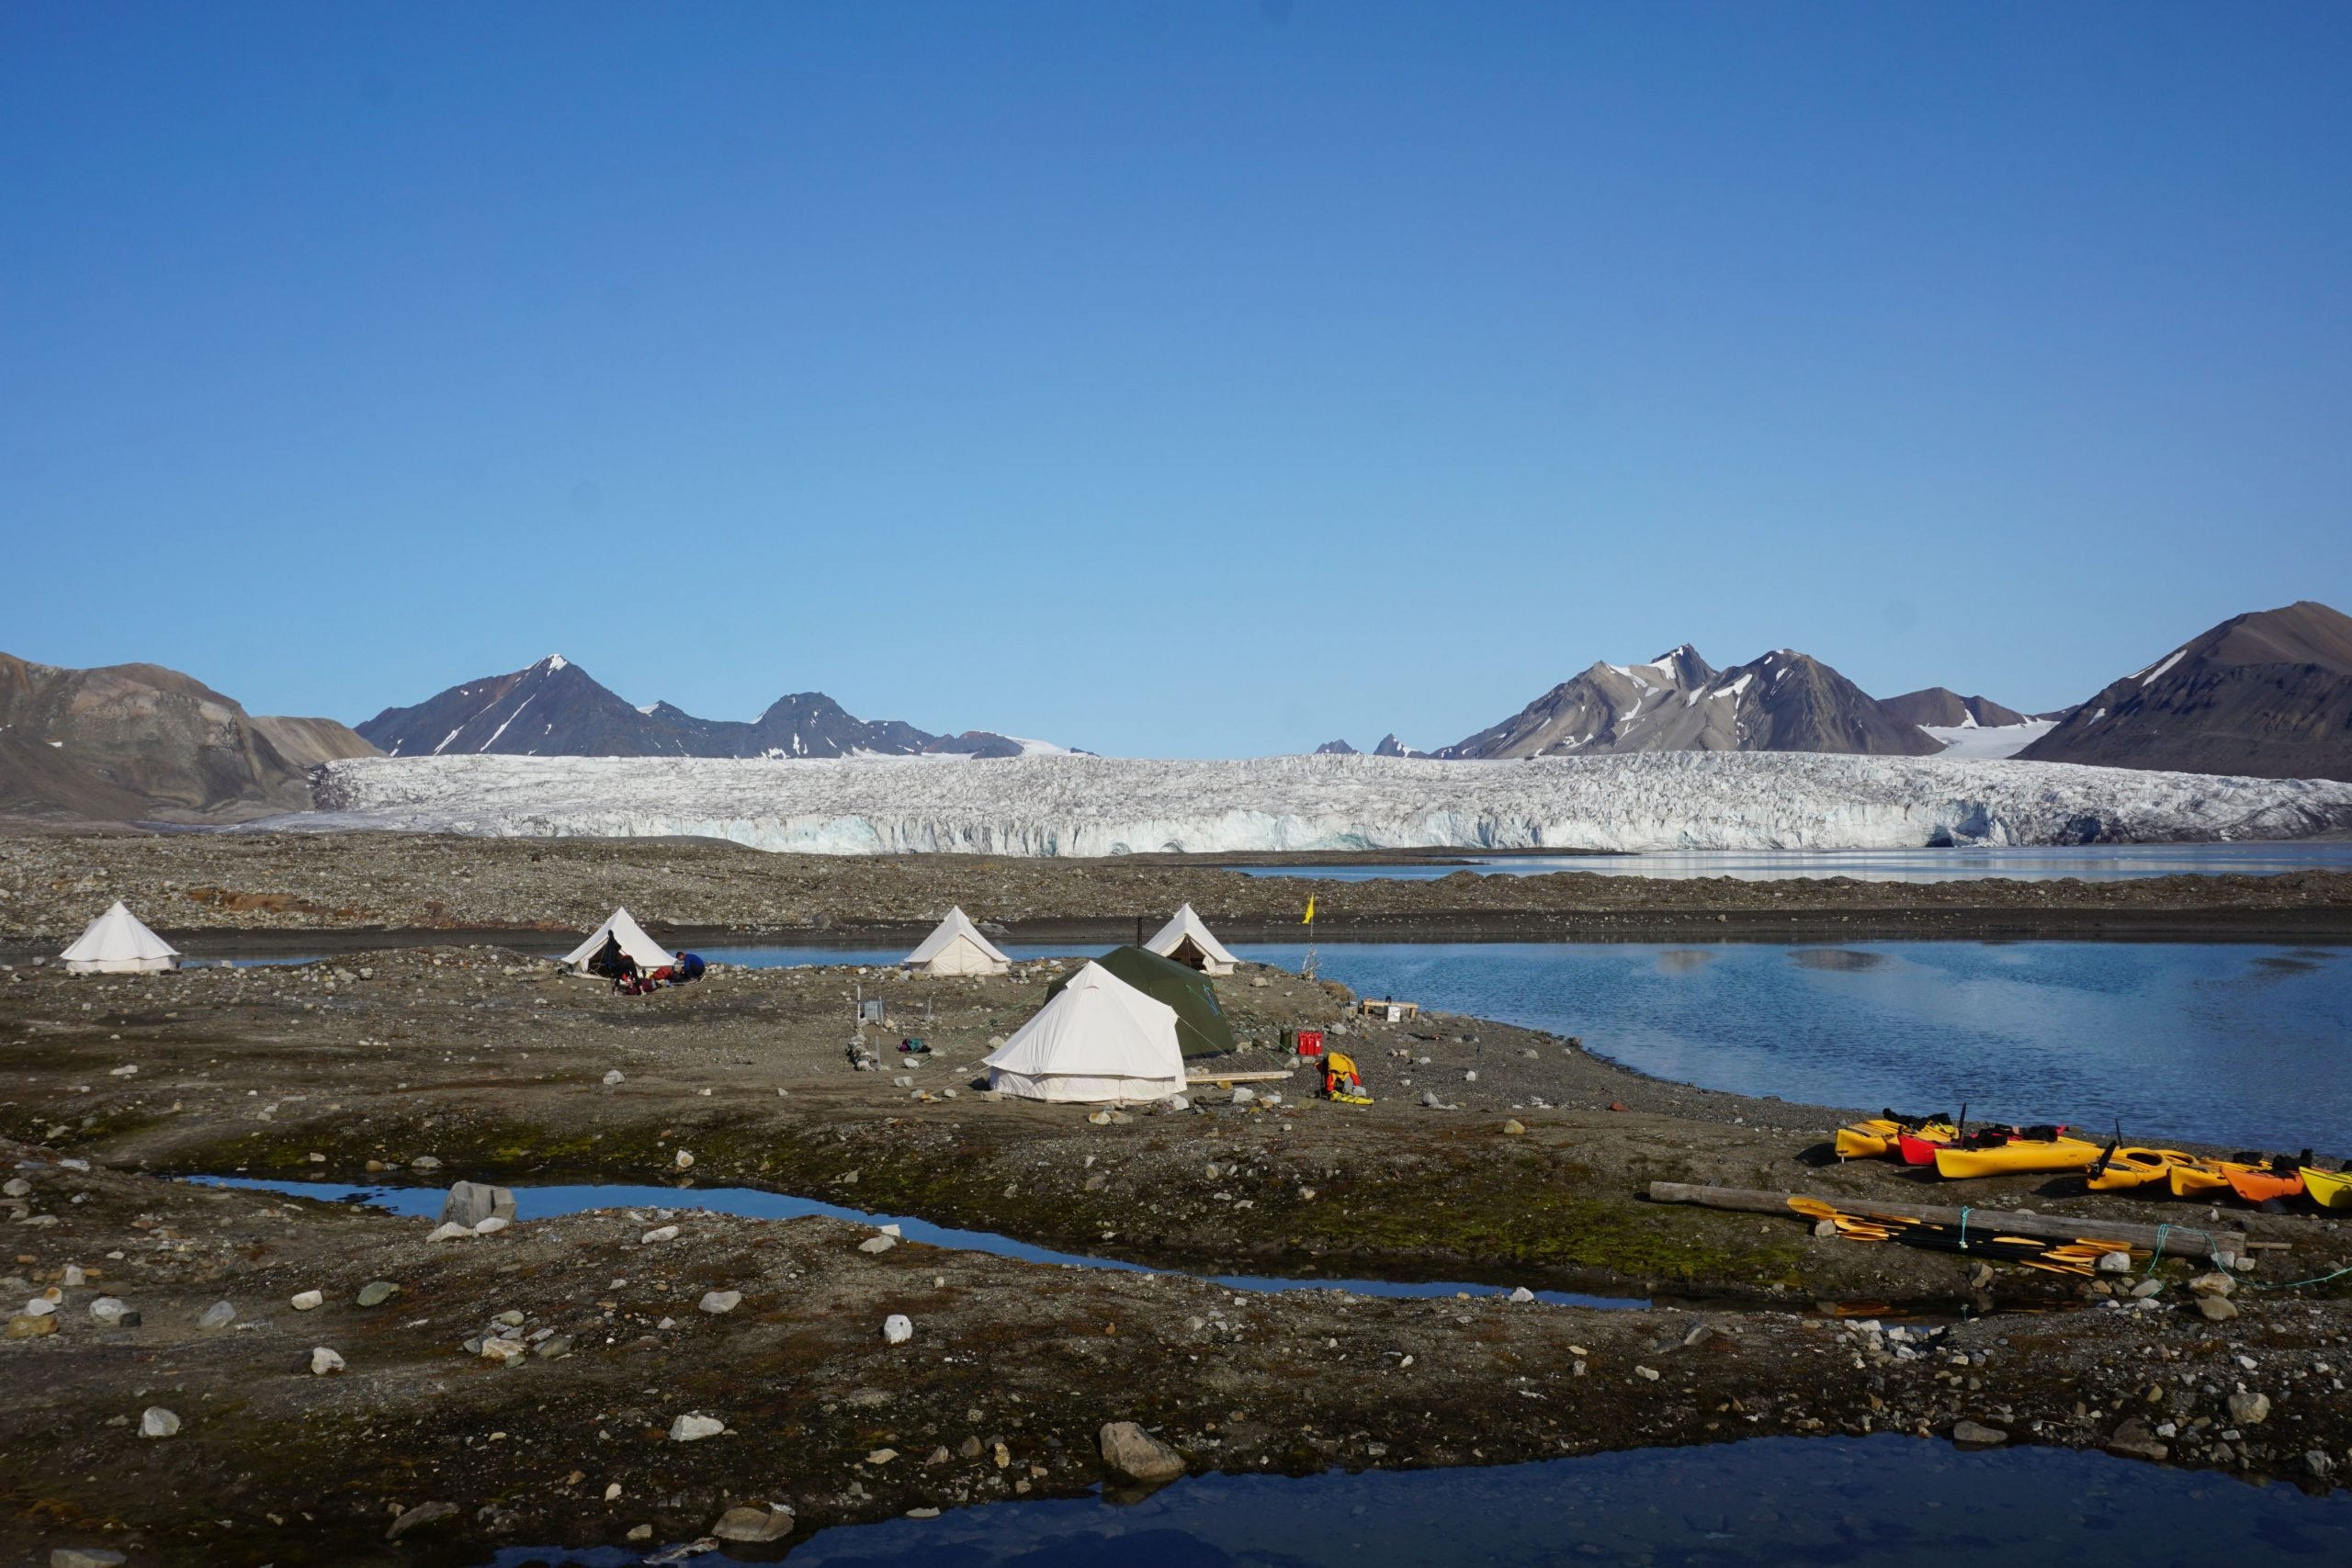 The wilderness camp on our seven-night adventure in Svalbard.